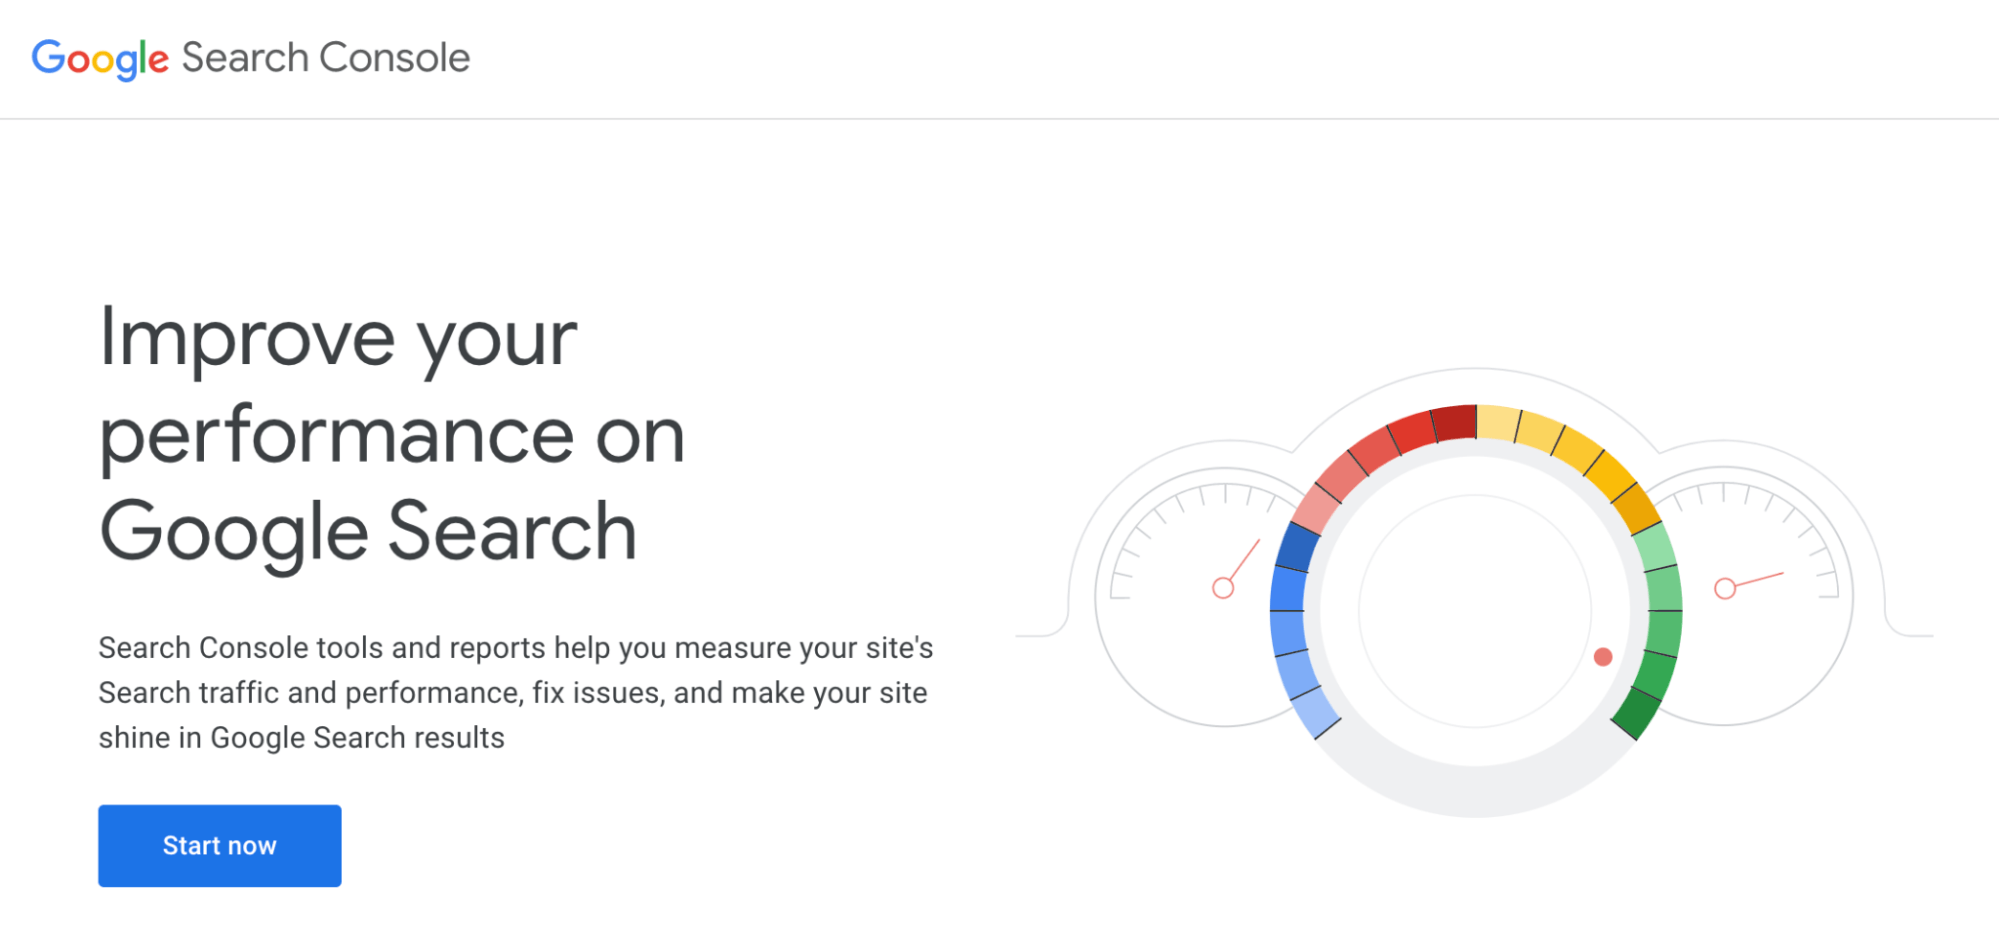 A screenshot of the Google Search Console homepage on a white background with a blue button